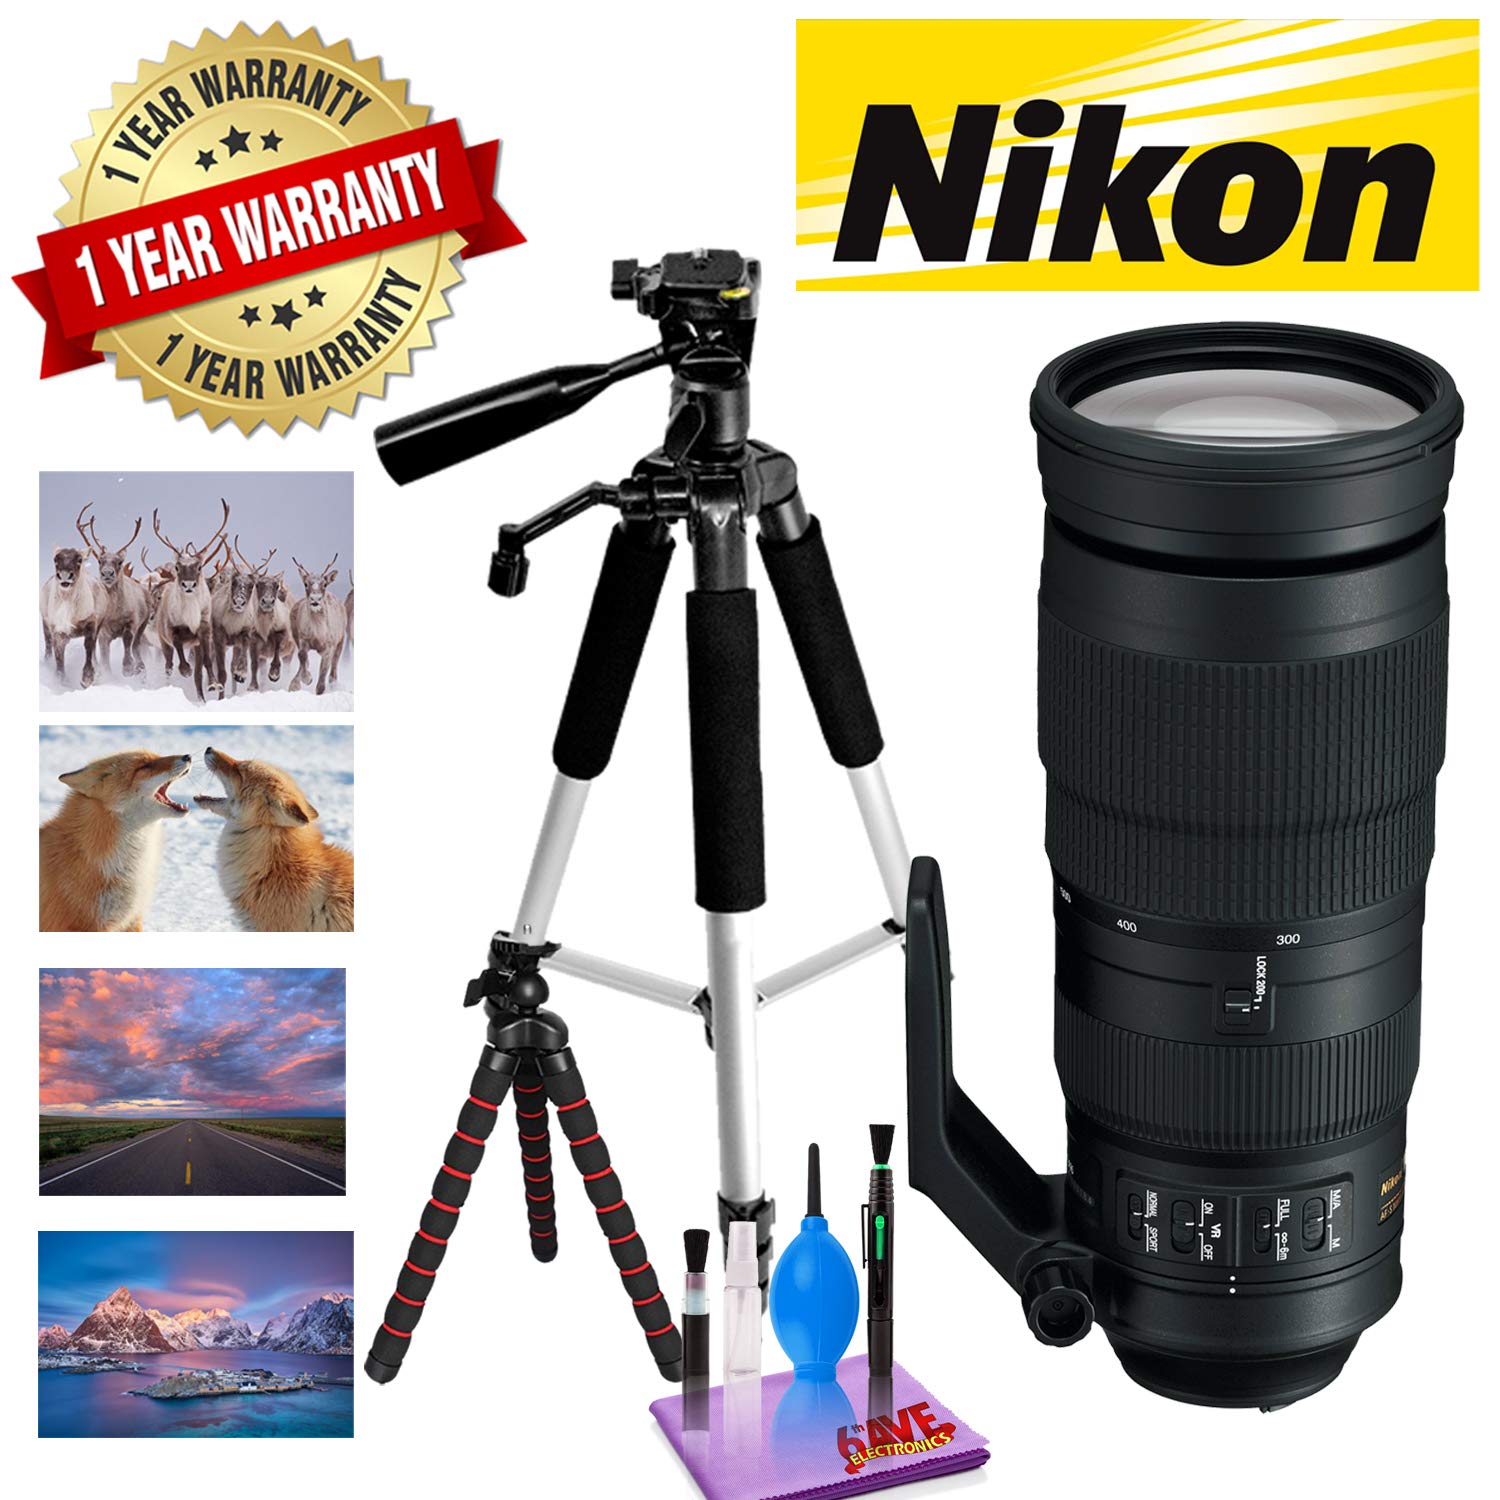 Nikon AF-S NIKKOR 200-500mm f/5.6E ED VR Lens with 1 Year Warranty, 12 in Flexible Tripod and 72 in Professional Heavy A